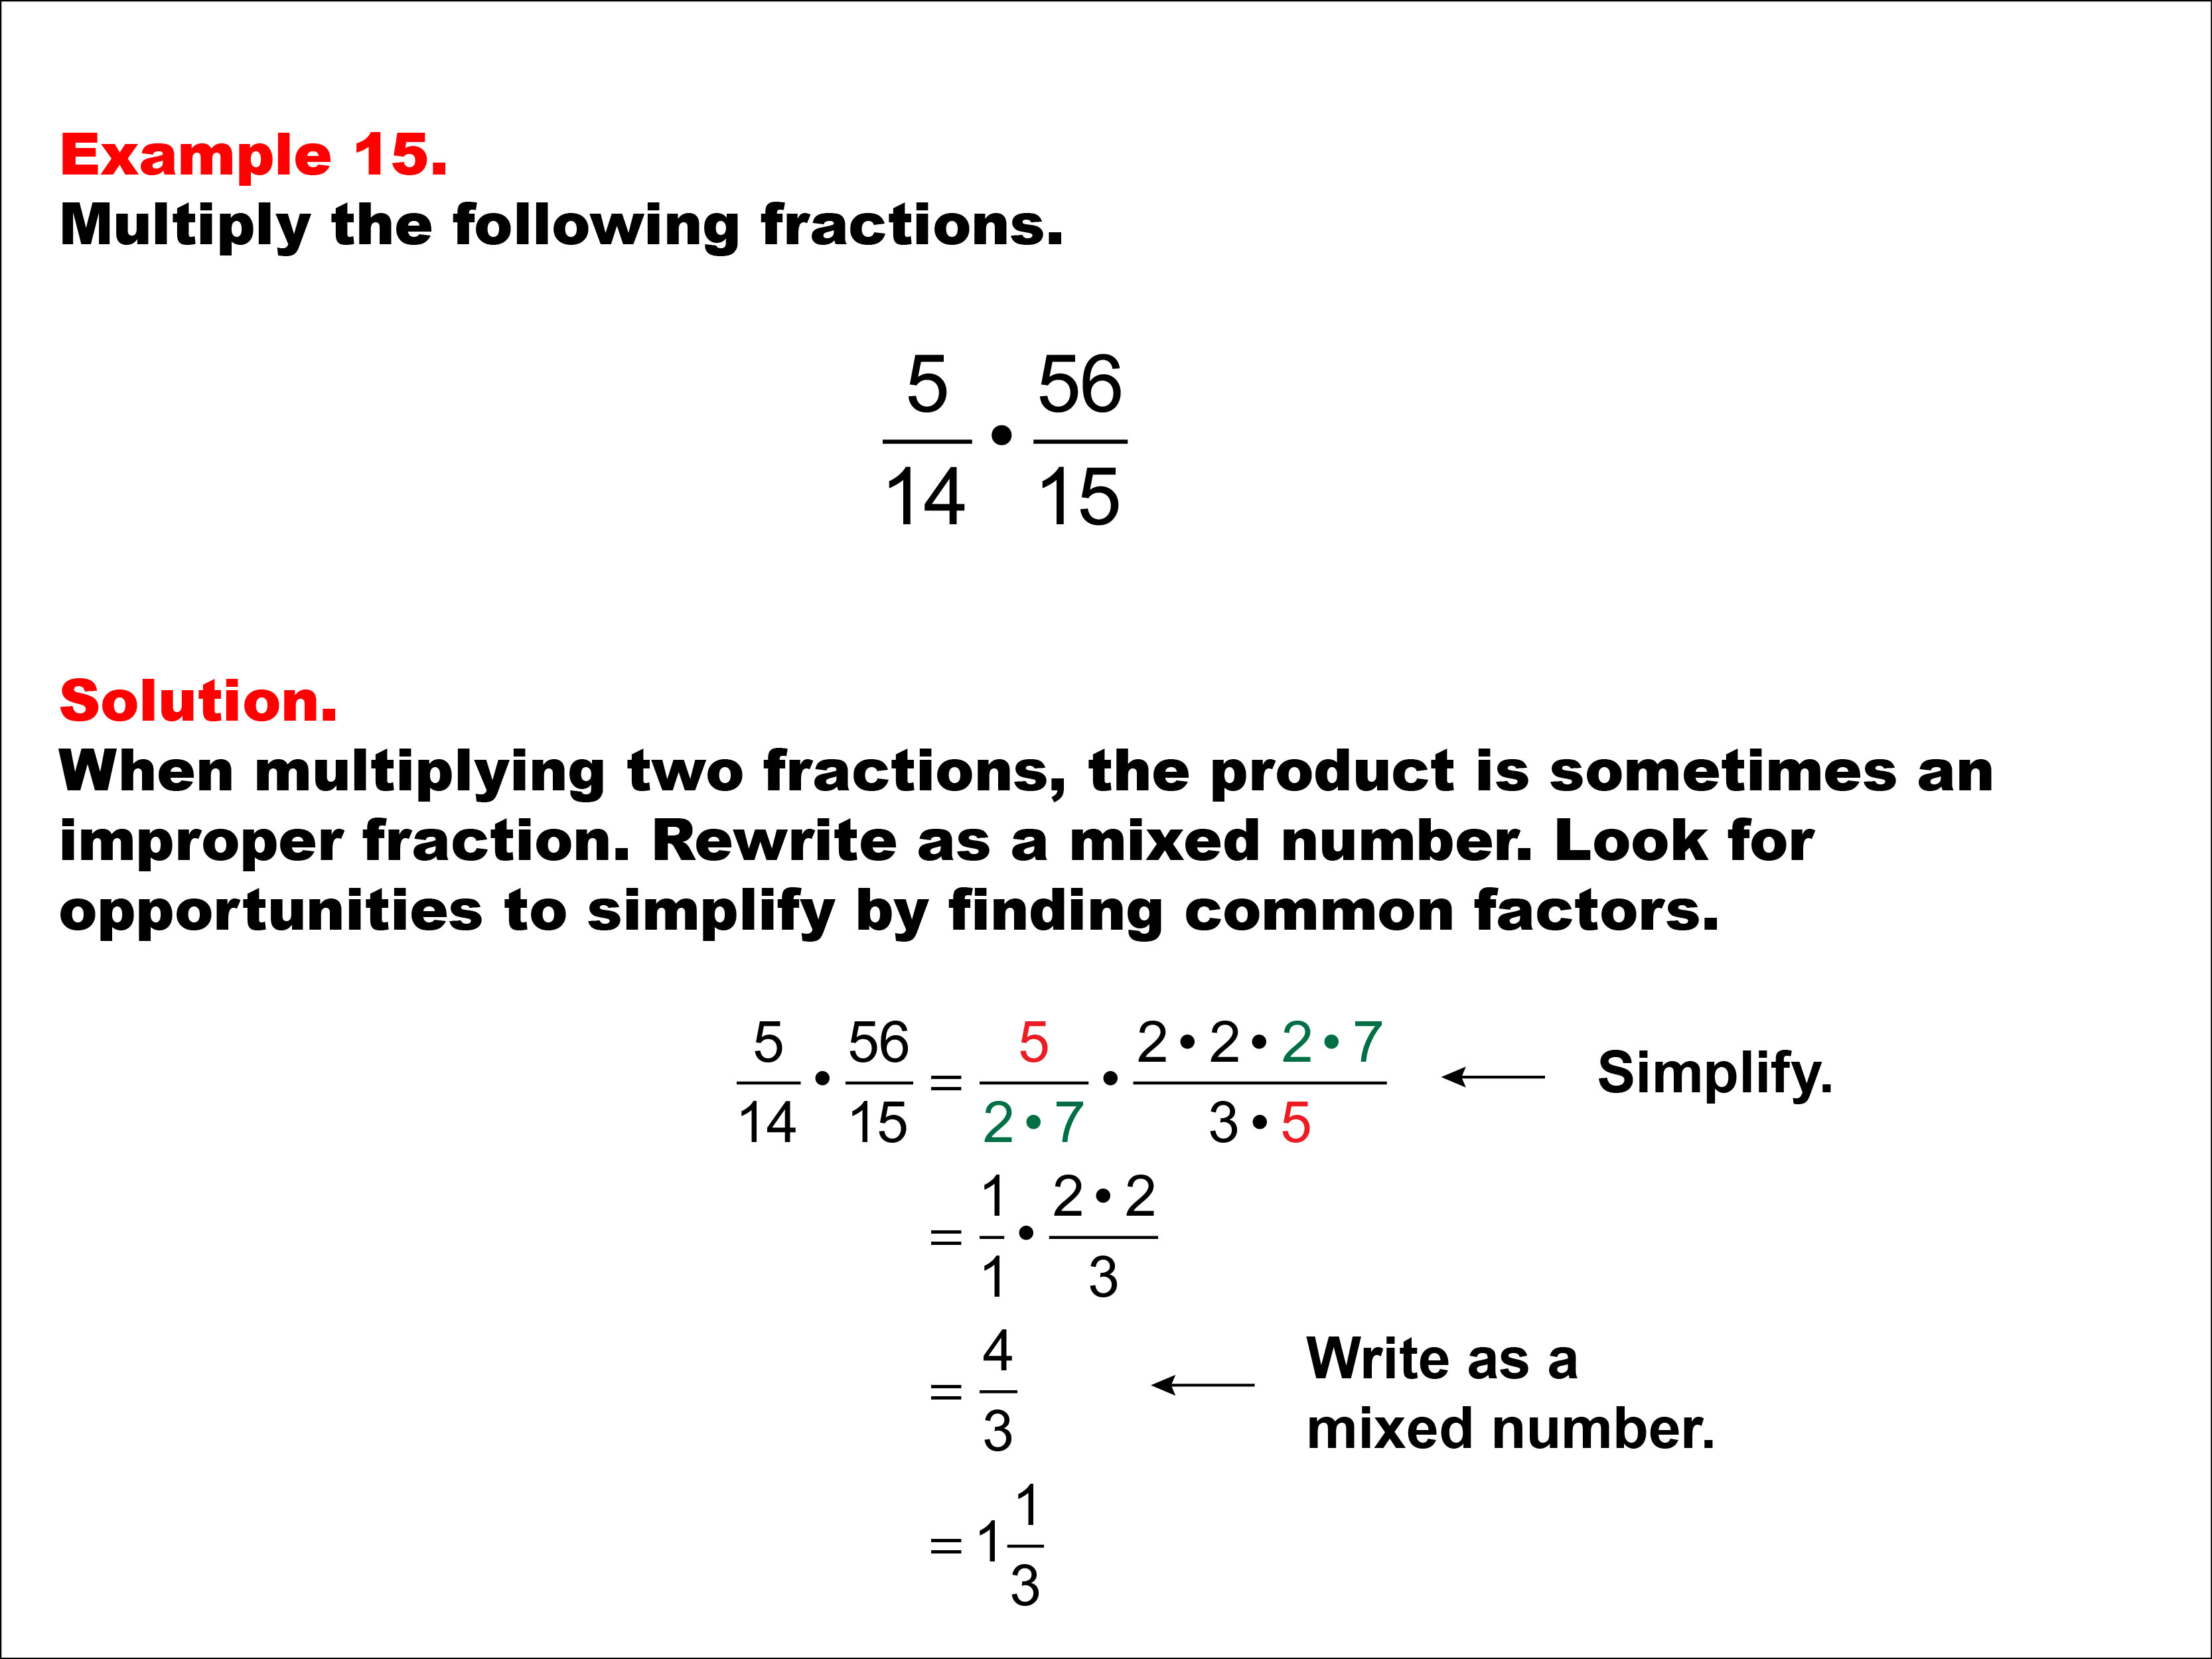 Multiplying Fractions: Example 15. Multiplying two fractions with different denominators. The numerators and denominators have at least one common factor. The product is an improper fraction.